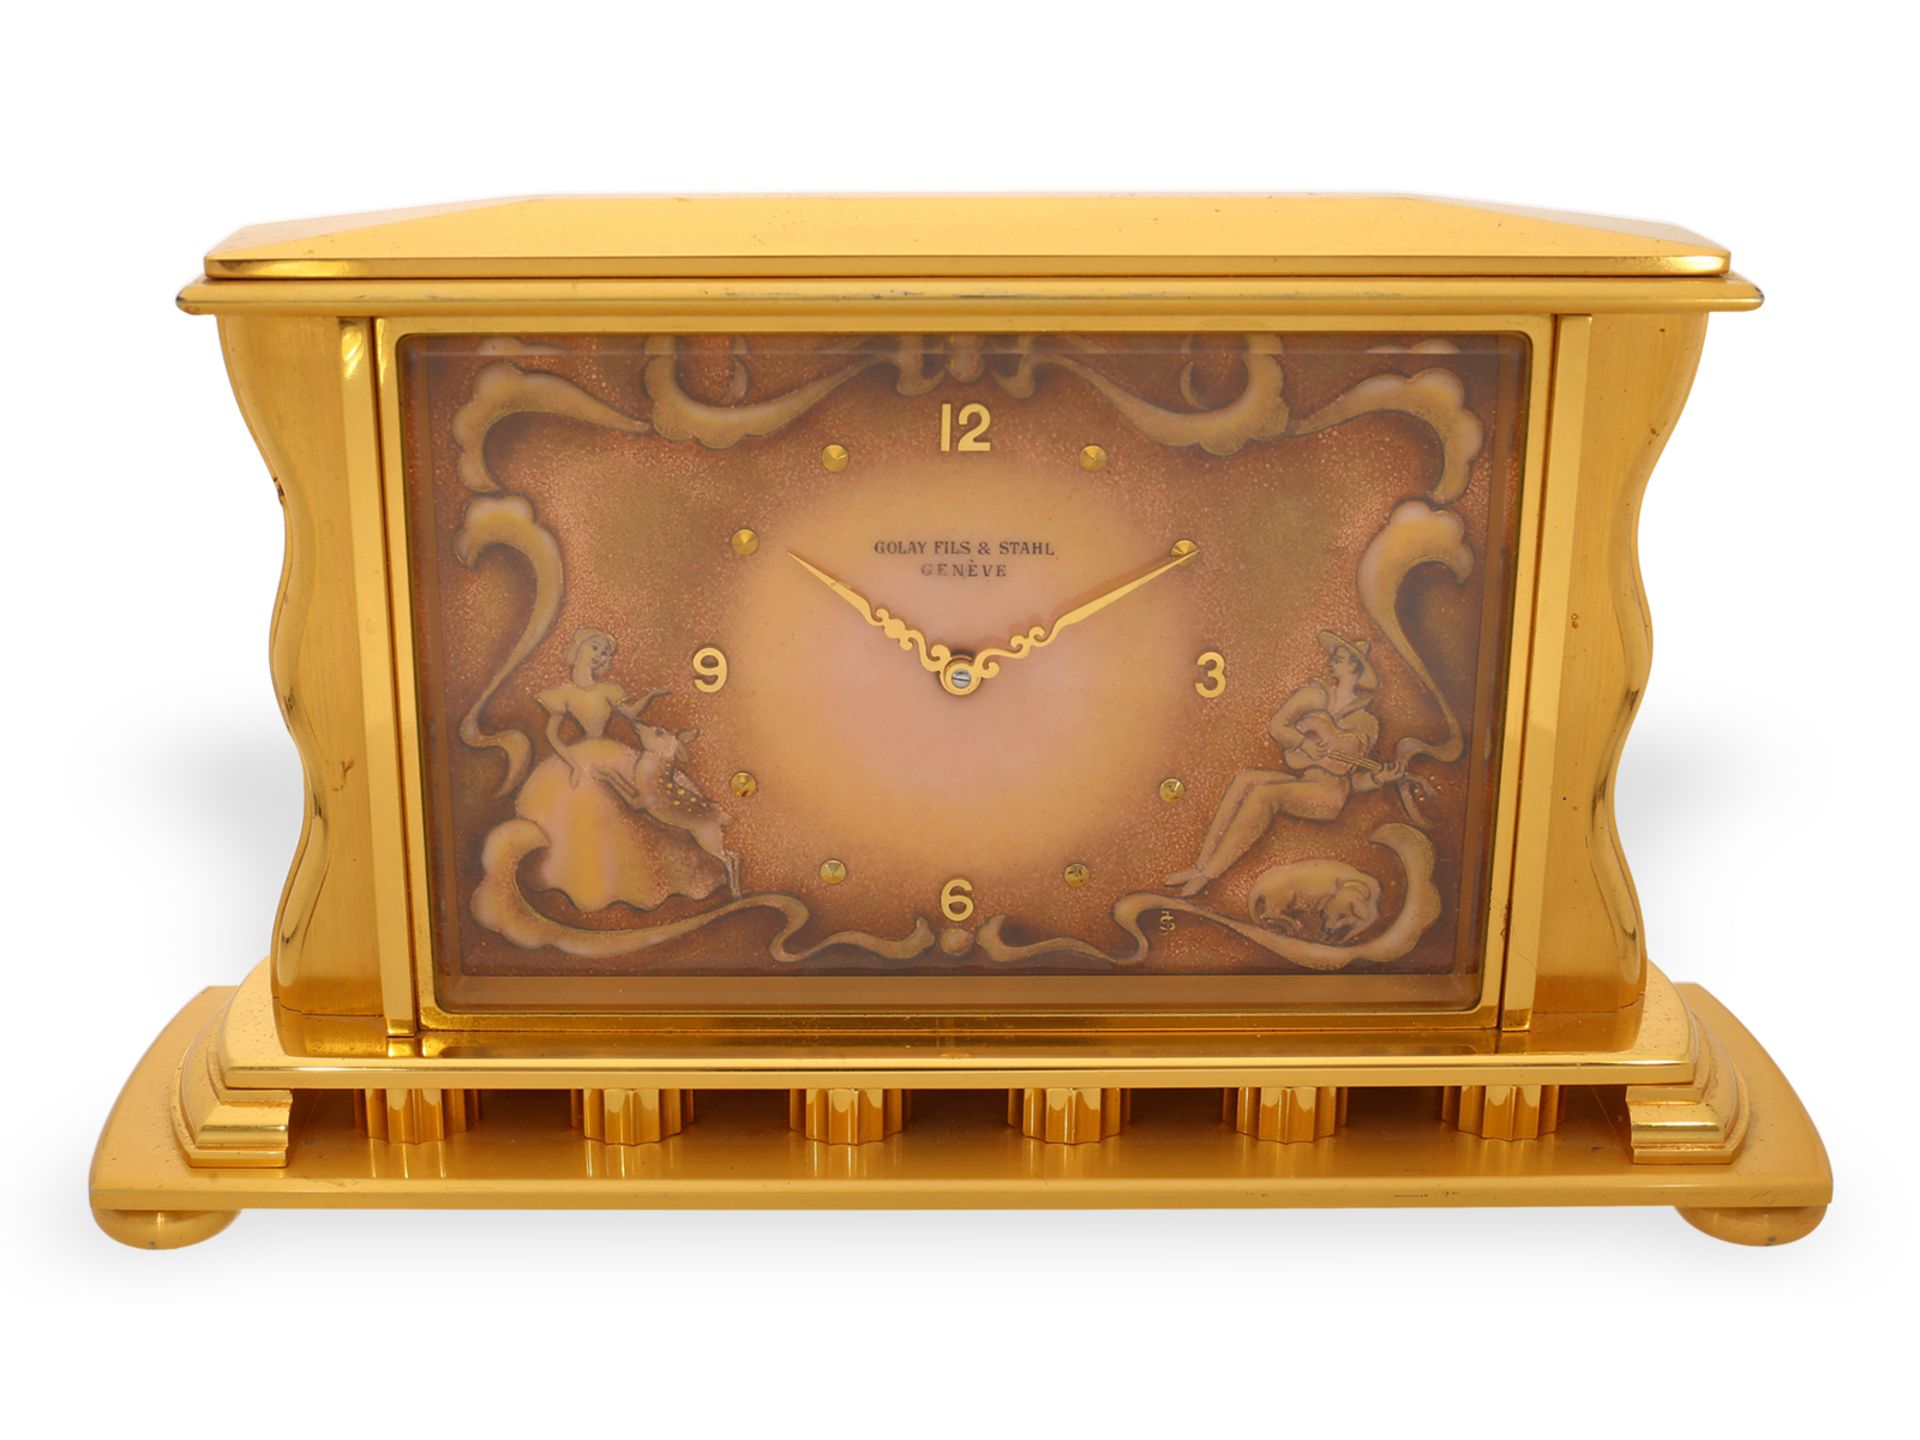 Attractive vintage table clock with enamel painting, Golay Fils & Stahl Geneve, ca. 1950